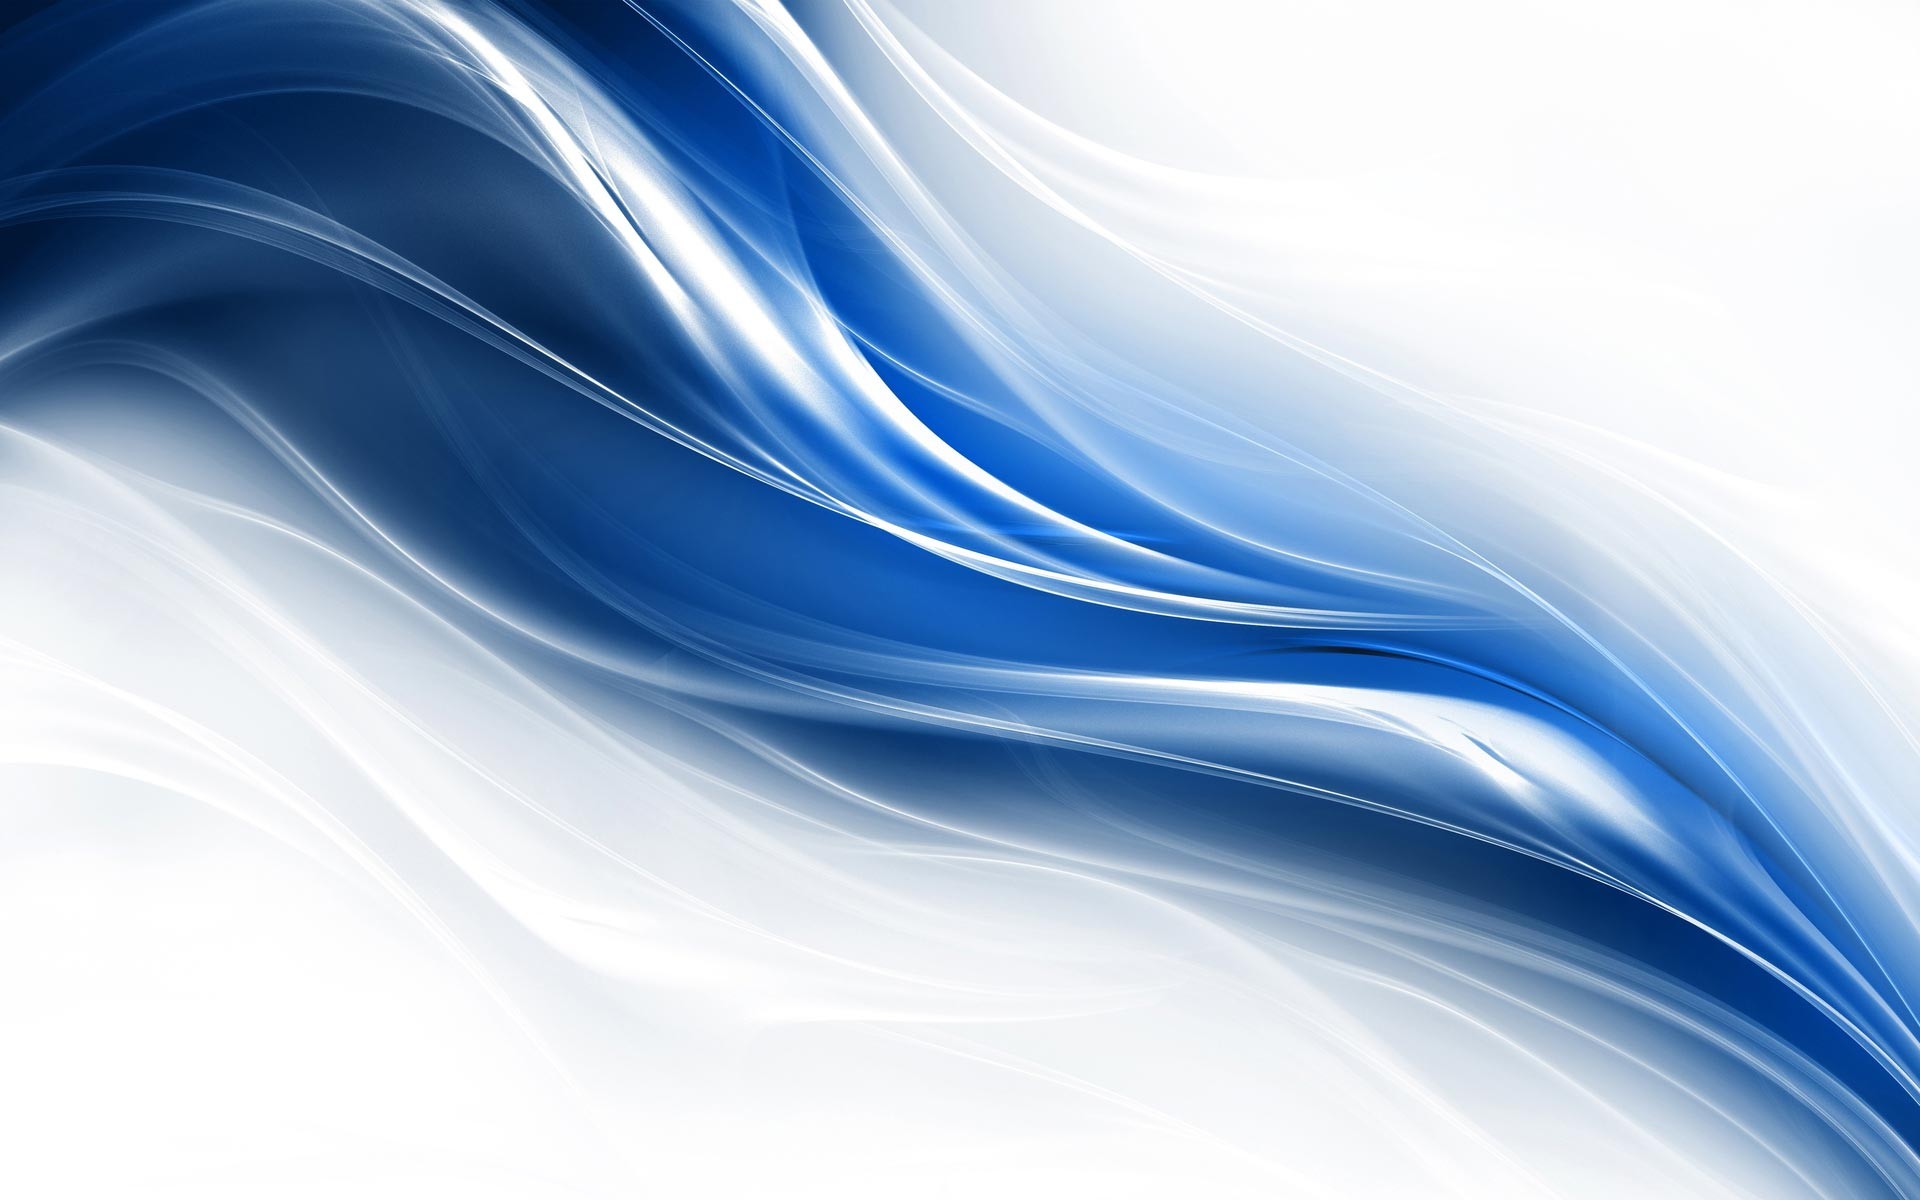  Blue  and White  background    Download free amazing 